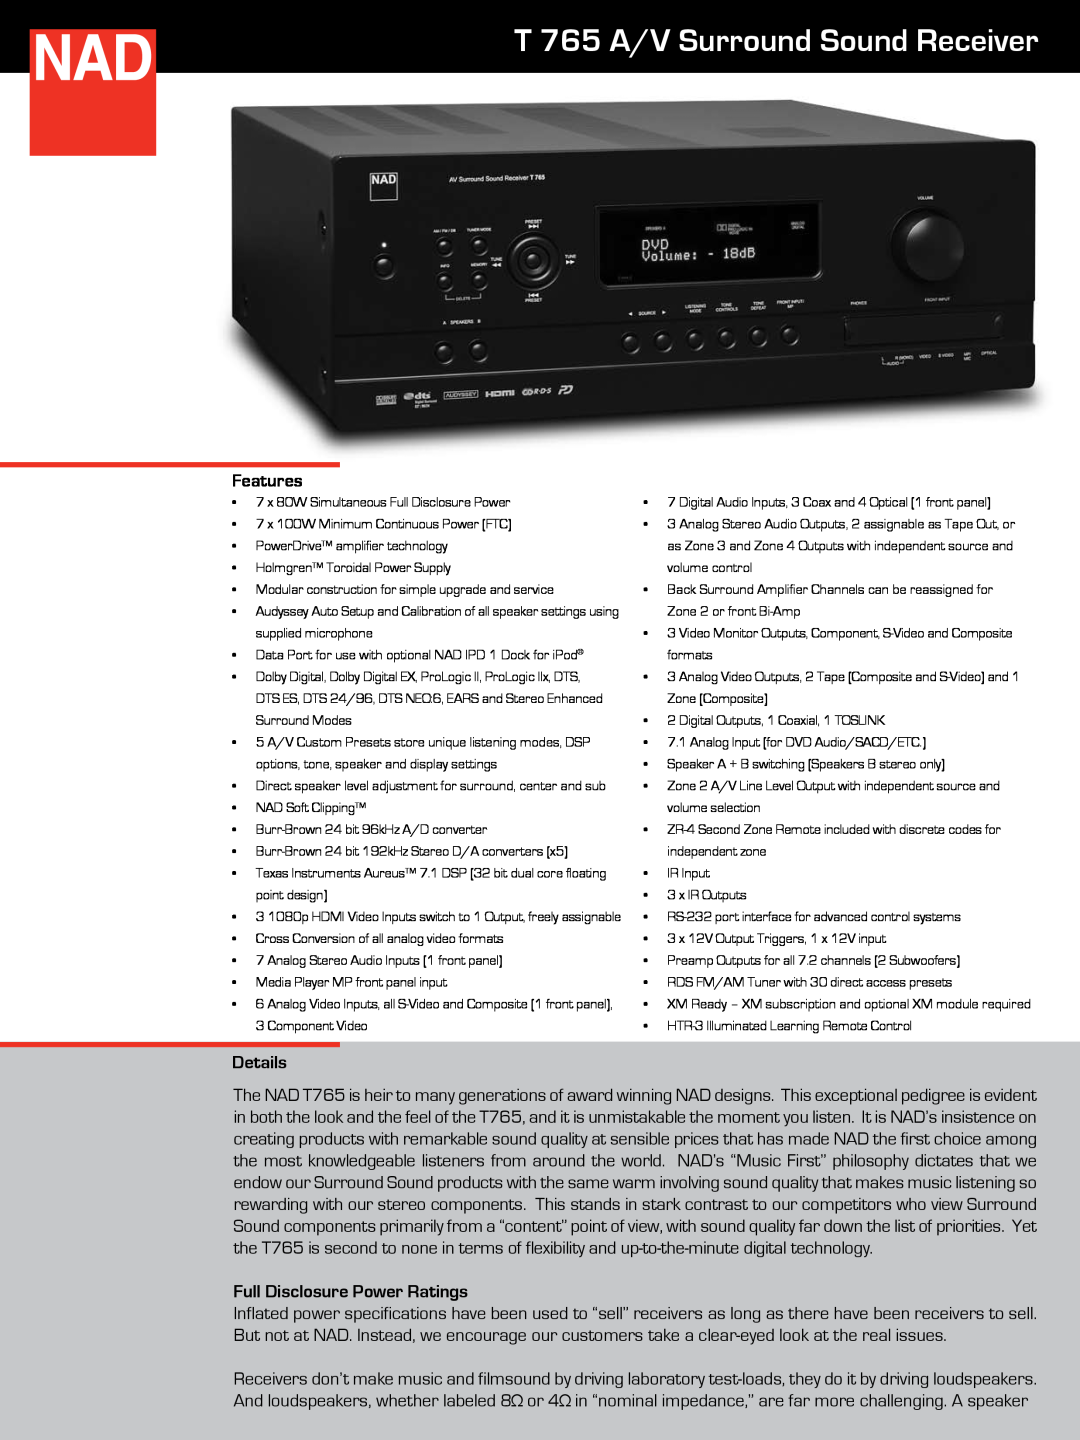 NAD t765 specifications T 765 A/V Surround Sound Receiver, Features, Details, Full Disclosure Power Ratings 